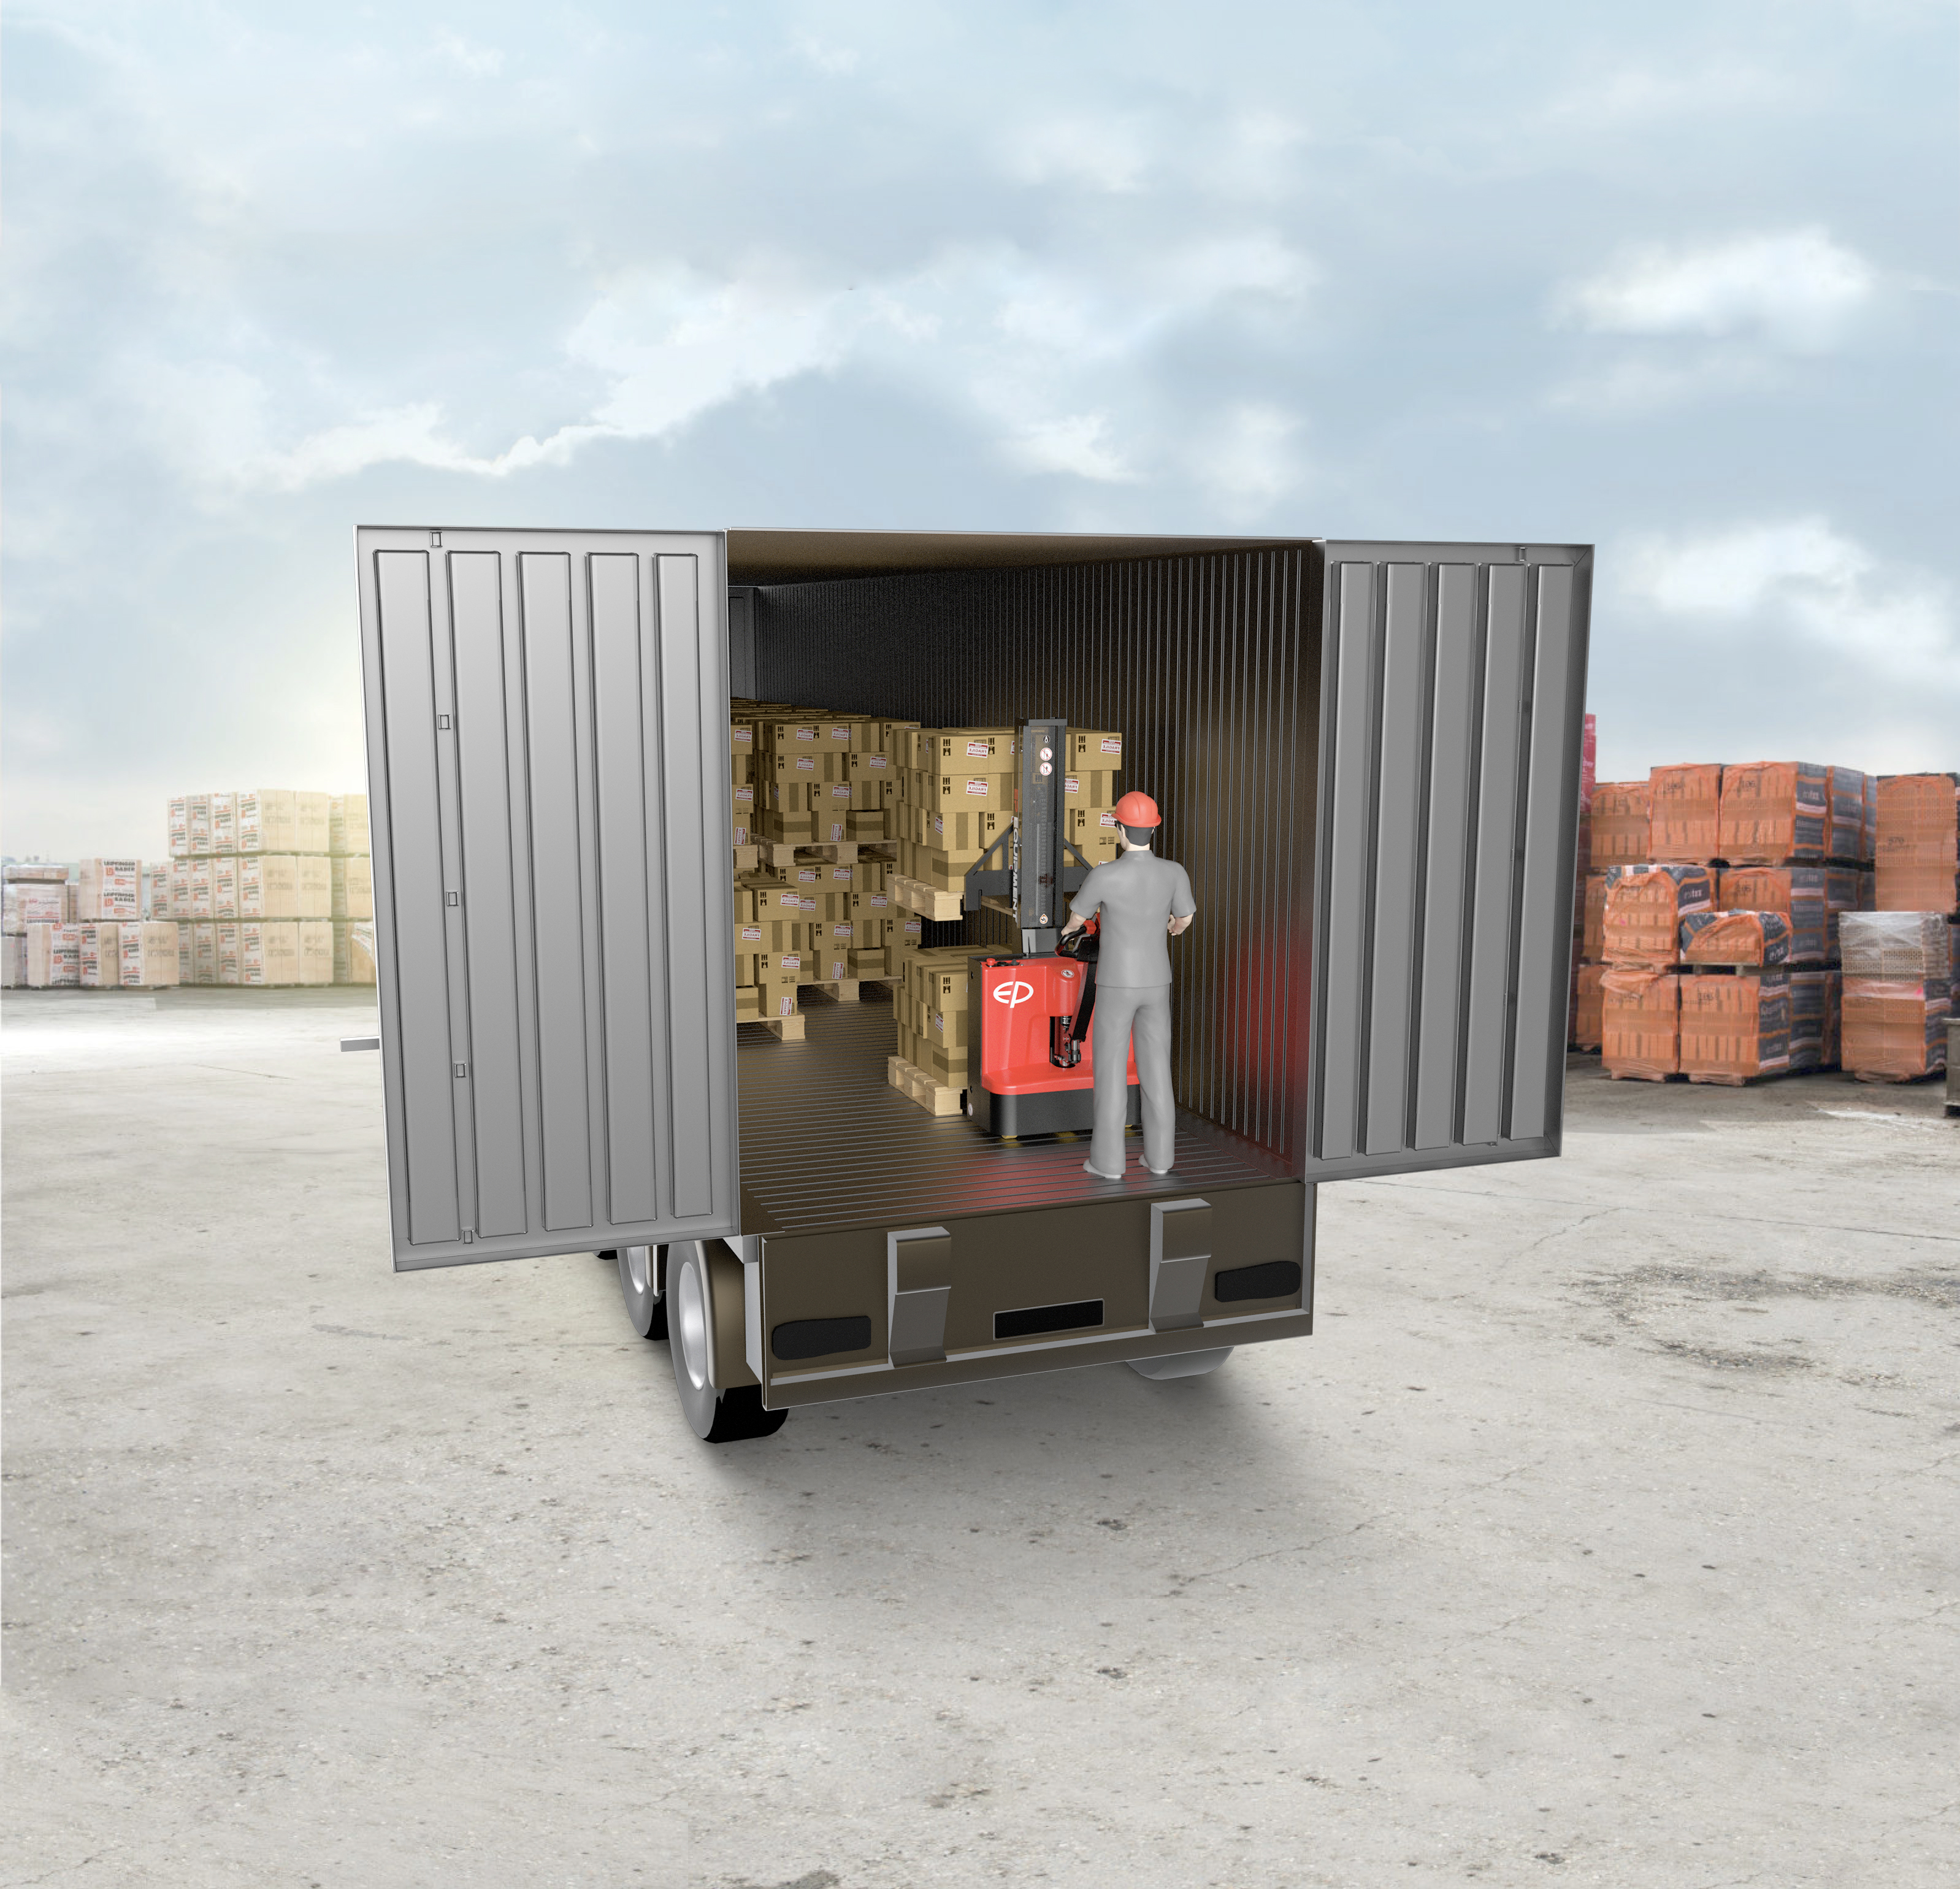 Xe Nâng Điện Stacker Esi161 Trong Container